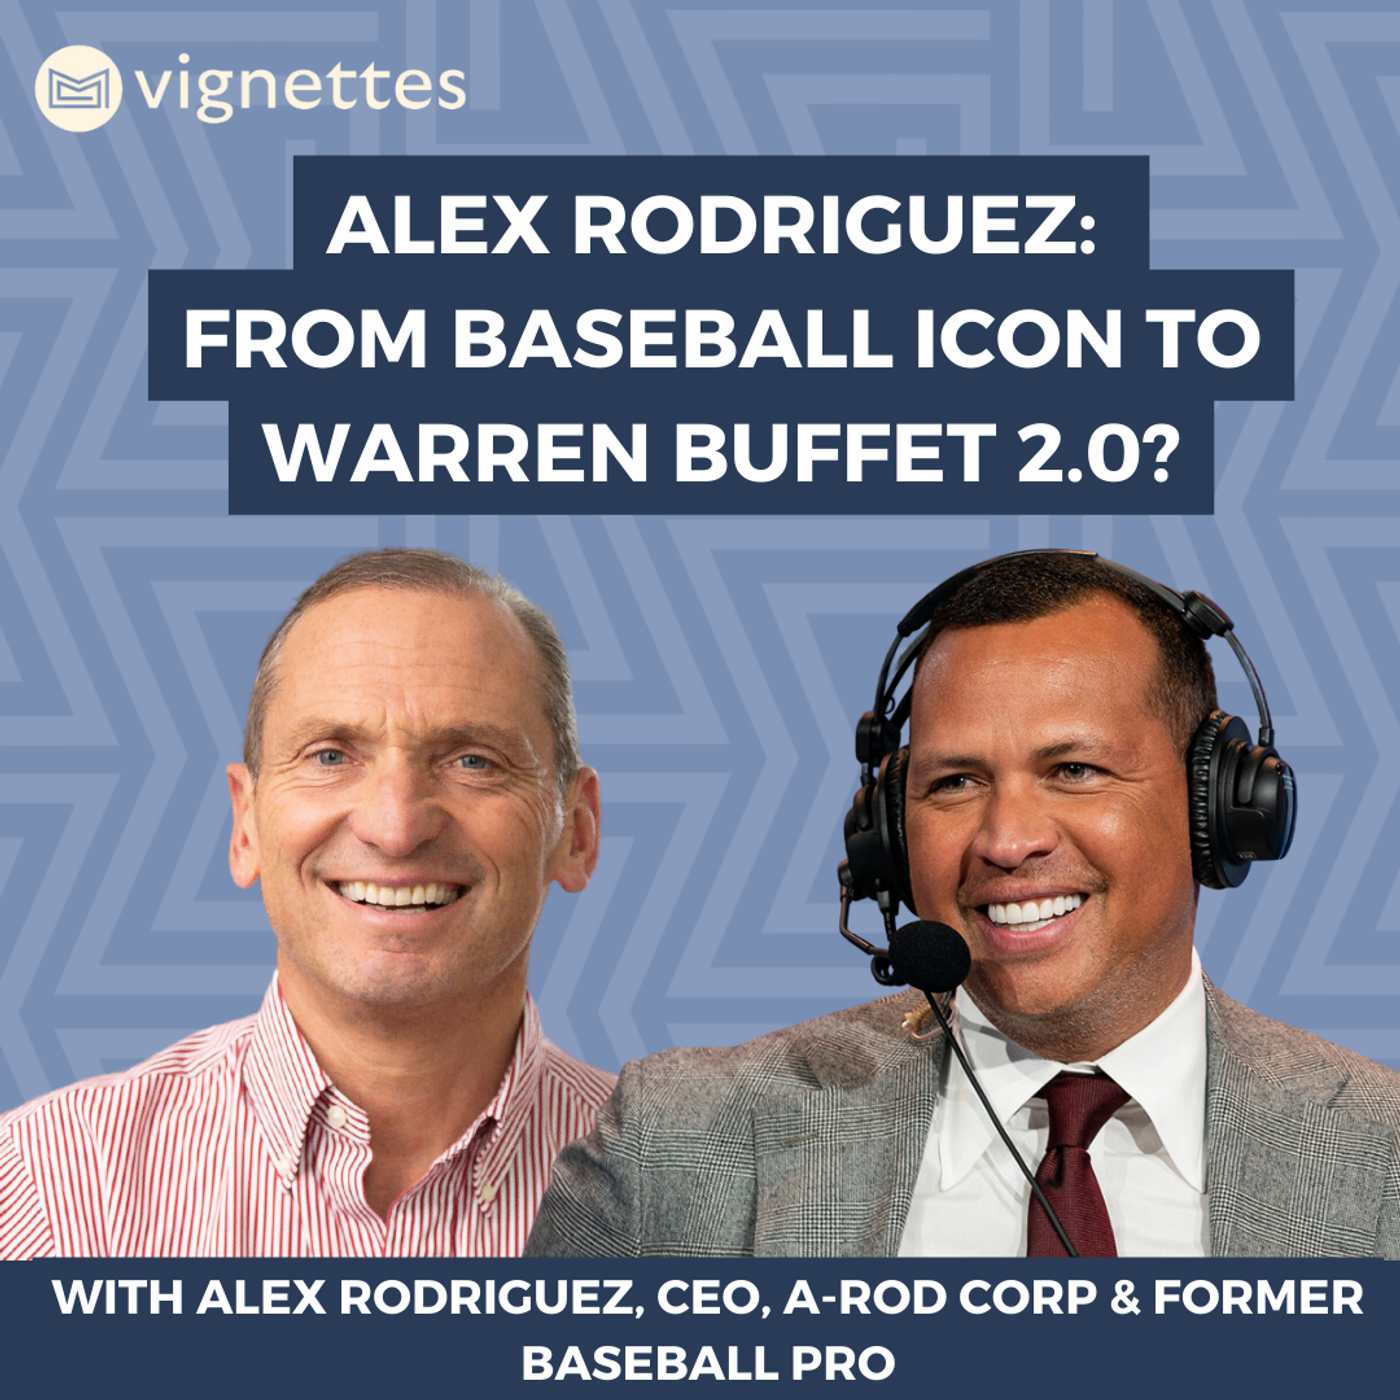 128: Money Maze Vignettes: From Baseball Icon to Warren Buffet 2.0? (With Alex Rodriguez, CEO of A-Rod Corp & Former Baseball Pro)